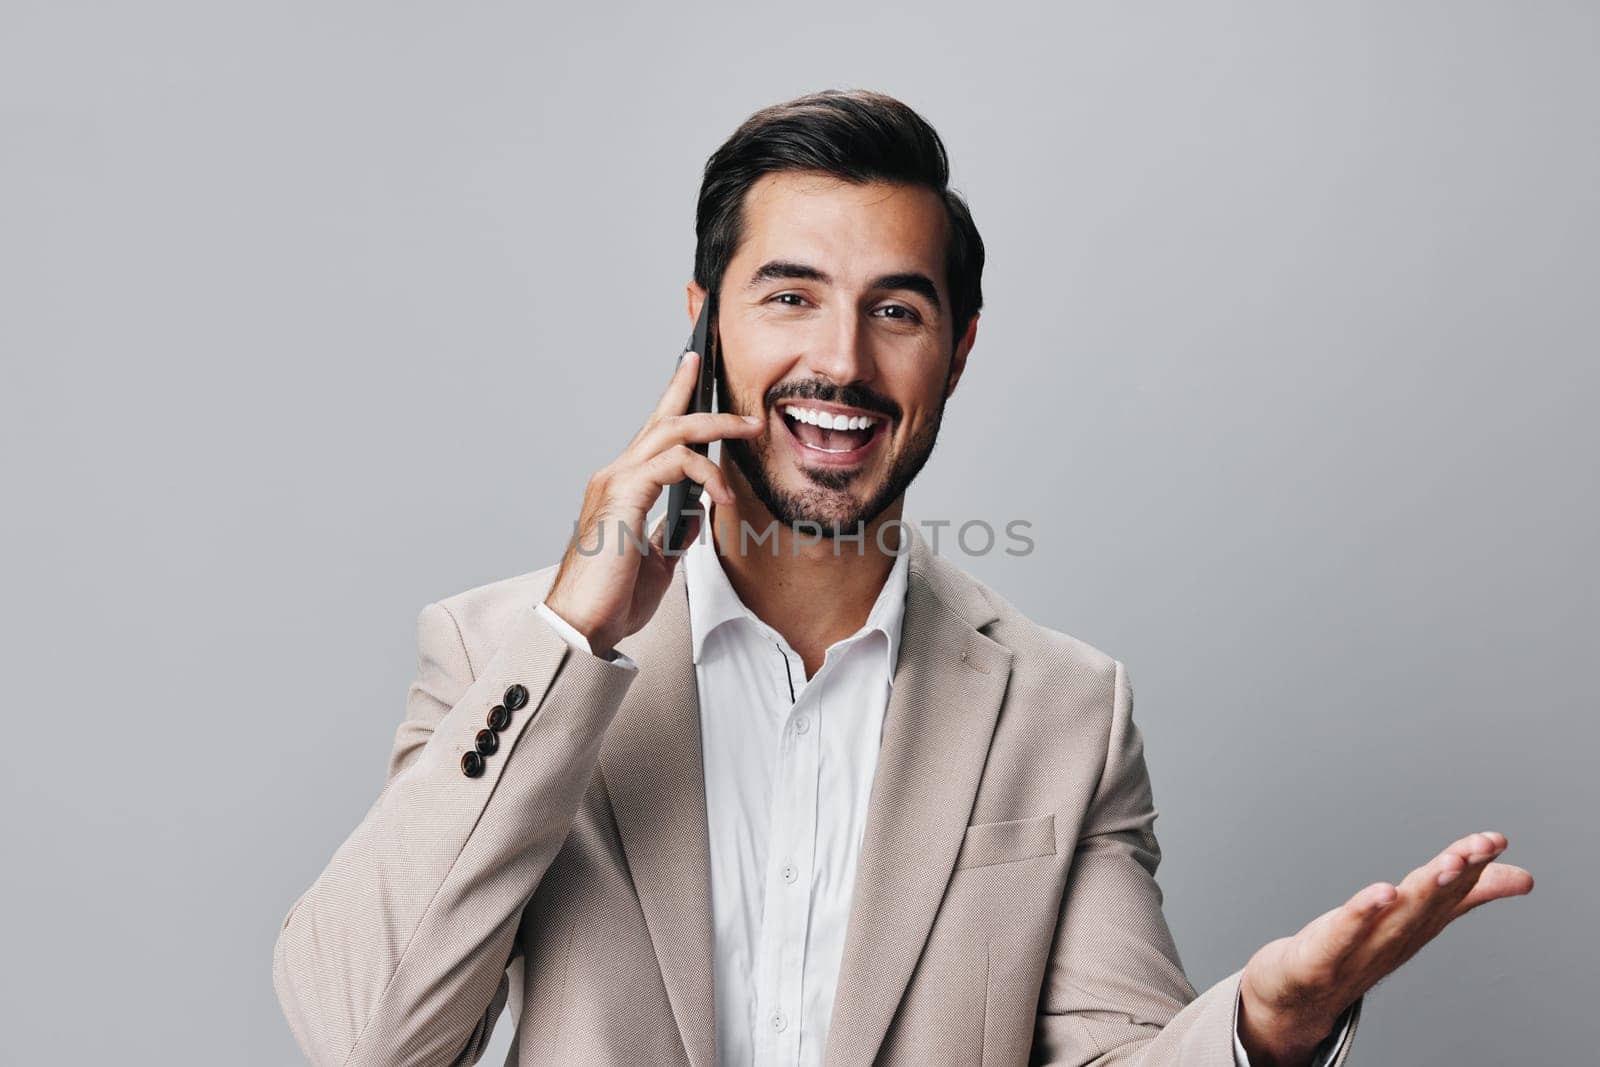 man background phone trading portrait call hold suit smartphone smile business happy by SHOTPRIME